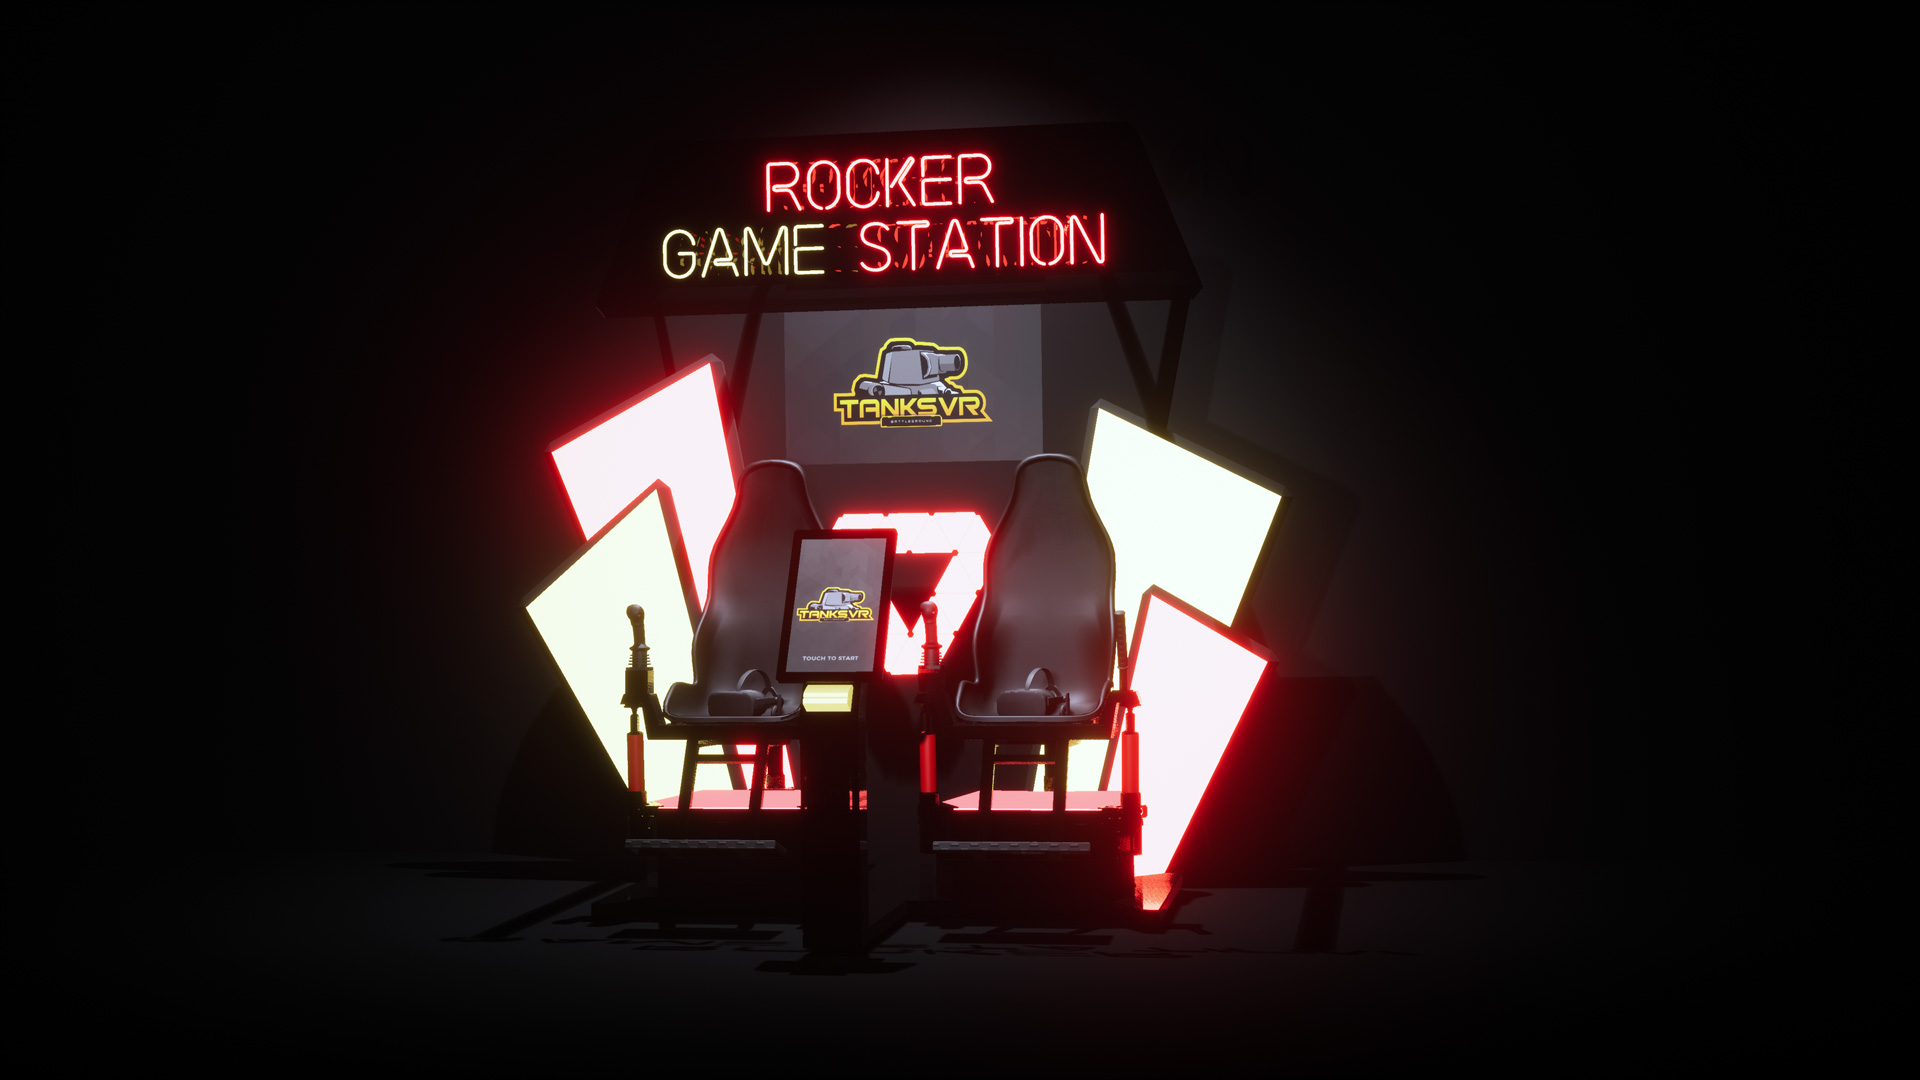 Rocker Game Station - VR attraction ride - Bmotion Technology